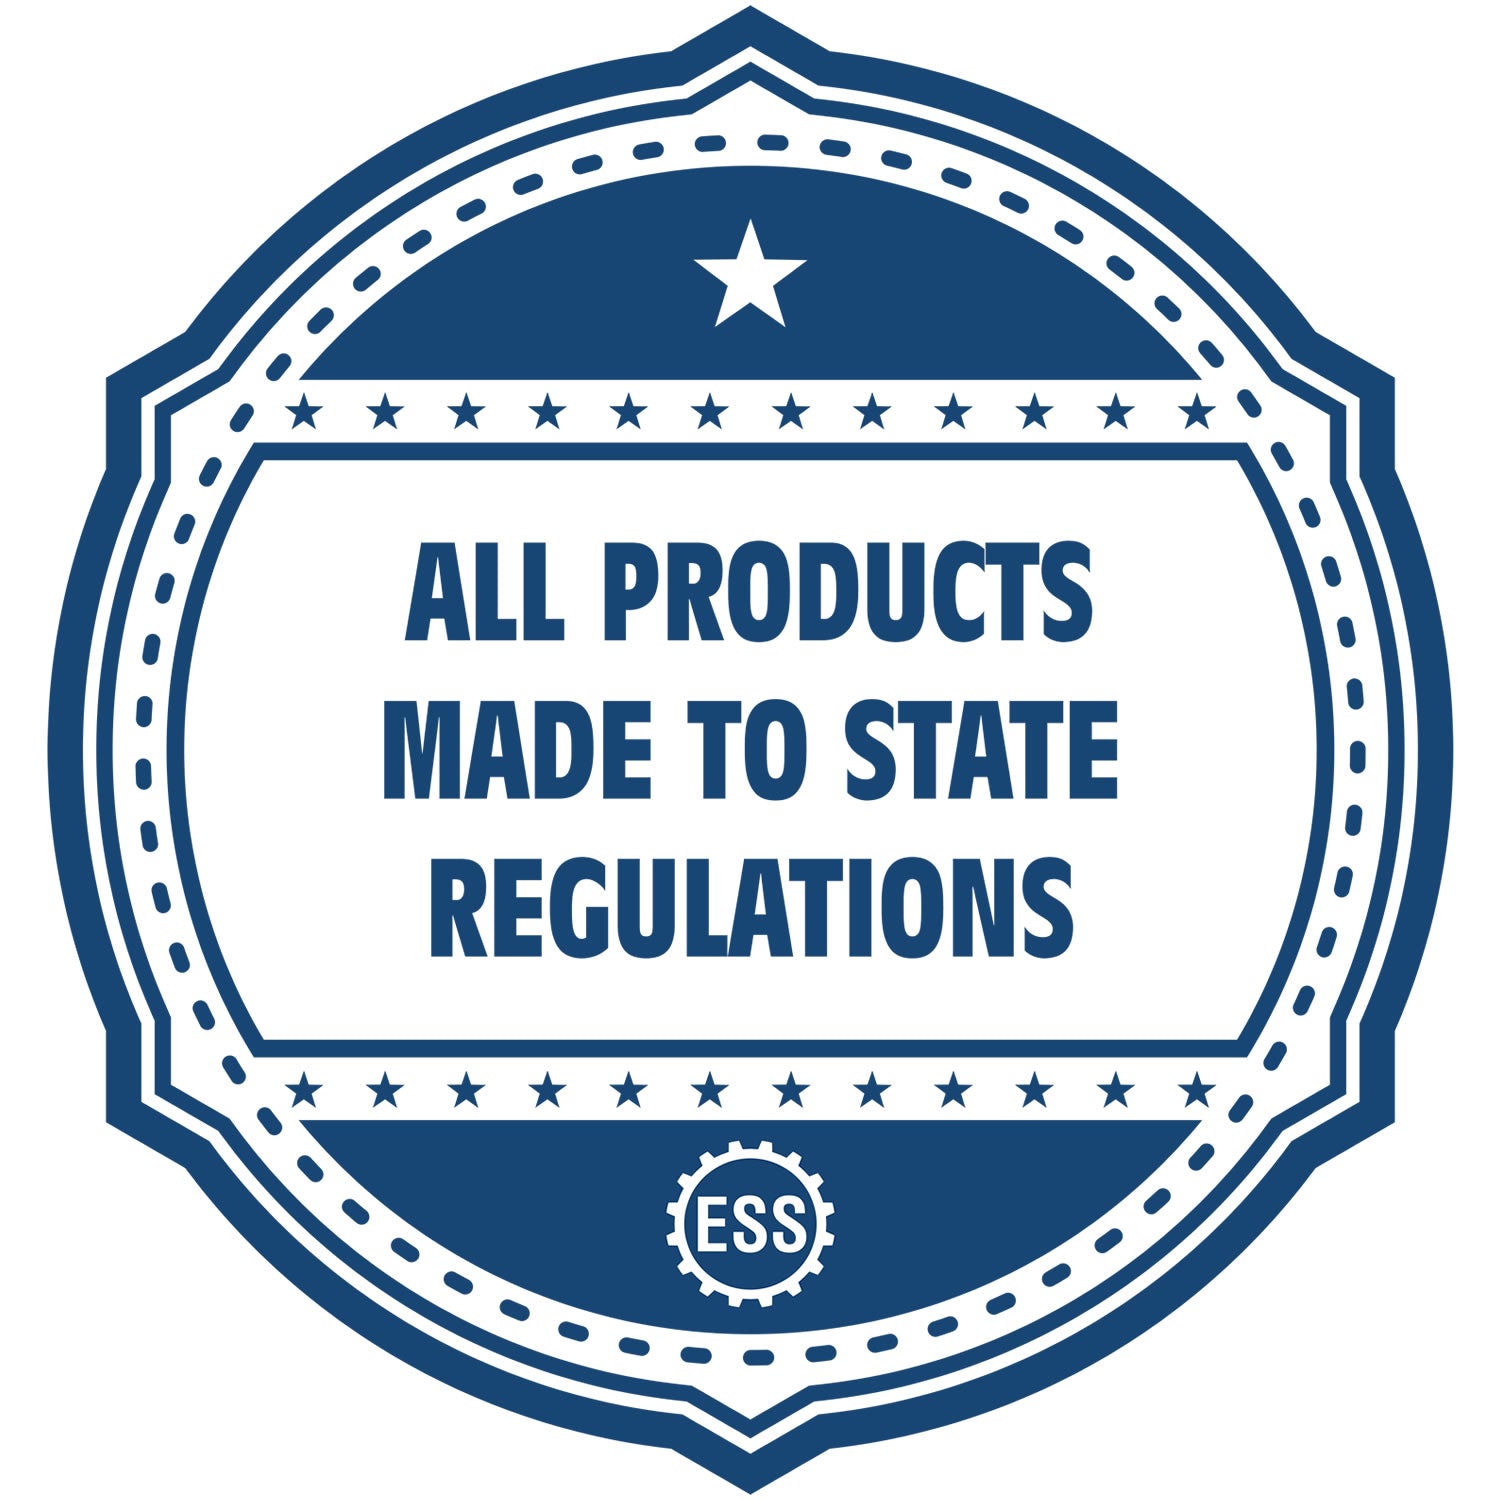 An icon or badge element for the State of South Dakota Architectural Seal Embosser showing that this product is made in compliance with state regulations.